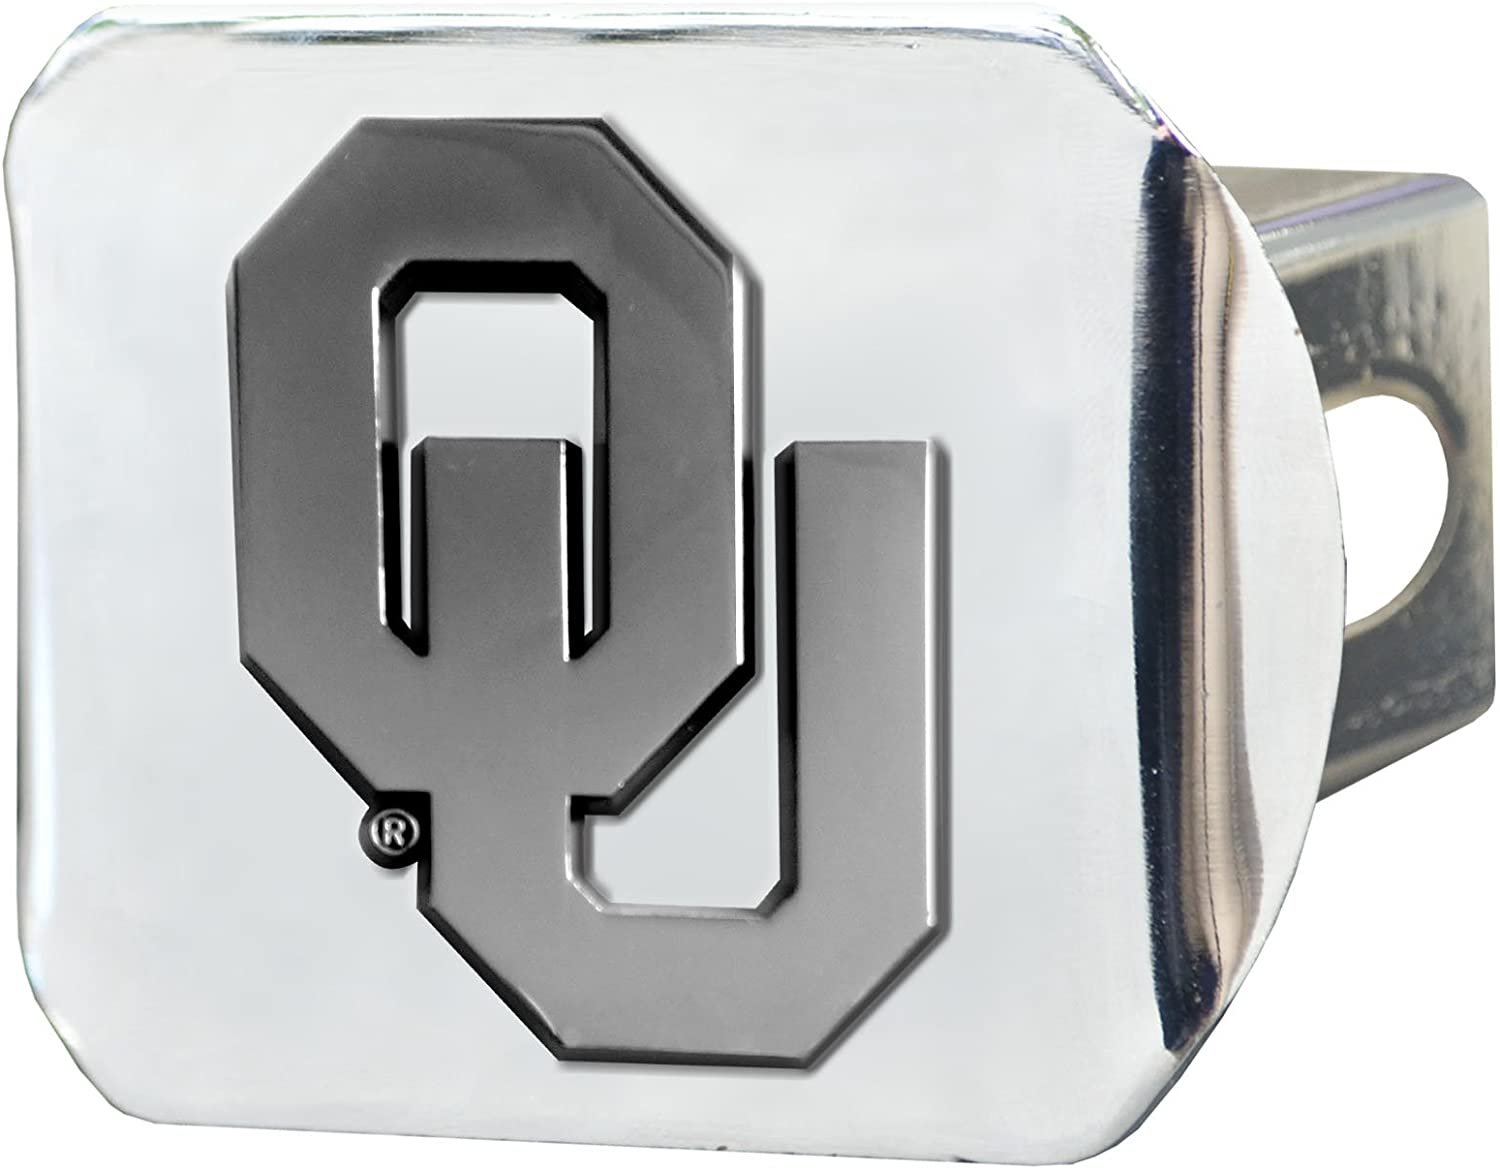 Oklahoma Sooners Hitch Cover Solid Metal with Raised Chrome Metal Emblem 2" Square Type III University of